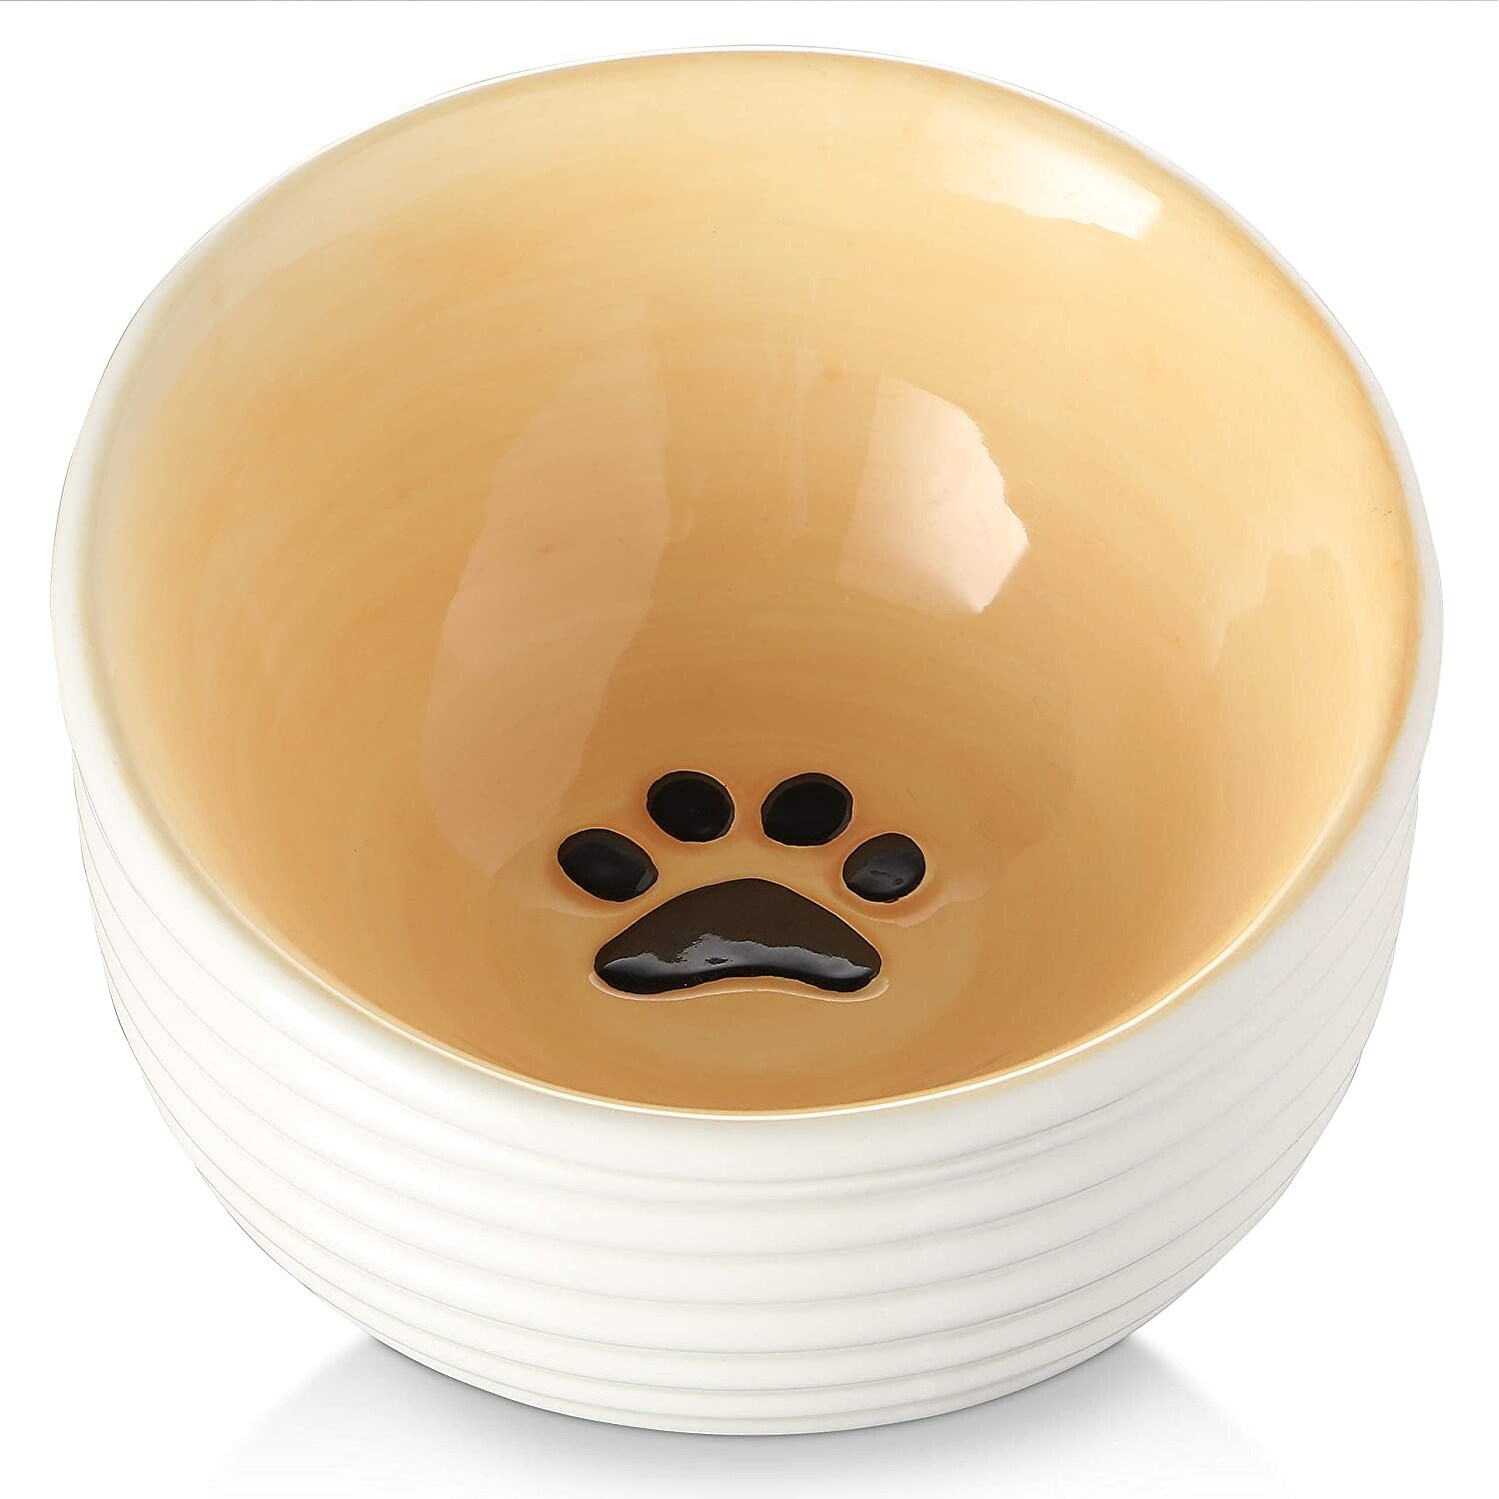 https://ak1.ostkcdn.com/images/products/is/images/direct/066f917e7b2c9c6915878acd2528080f32807ff8/Y-YHY-Cat-Food-Bowls%2C15-Ounce%2C-Elevated-Cat-Bowl-Anti-Vomiting%2C-Raised-Cat-Water-Bowl%2C-Puppy-Bowls.jpg